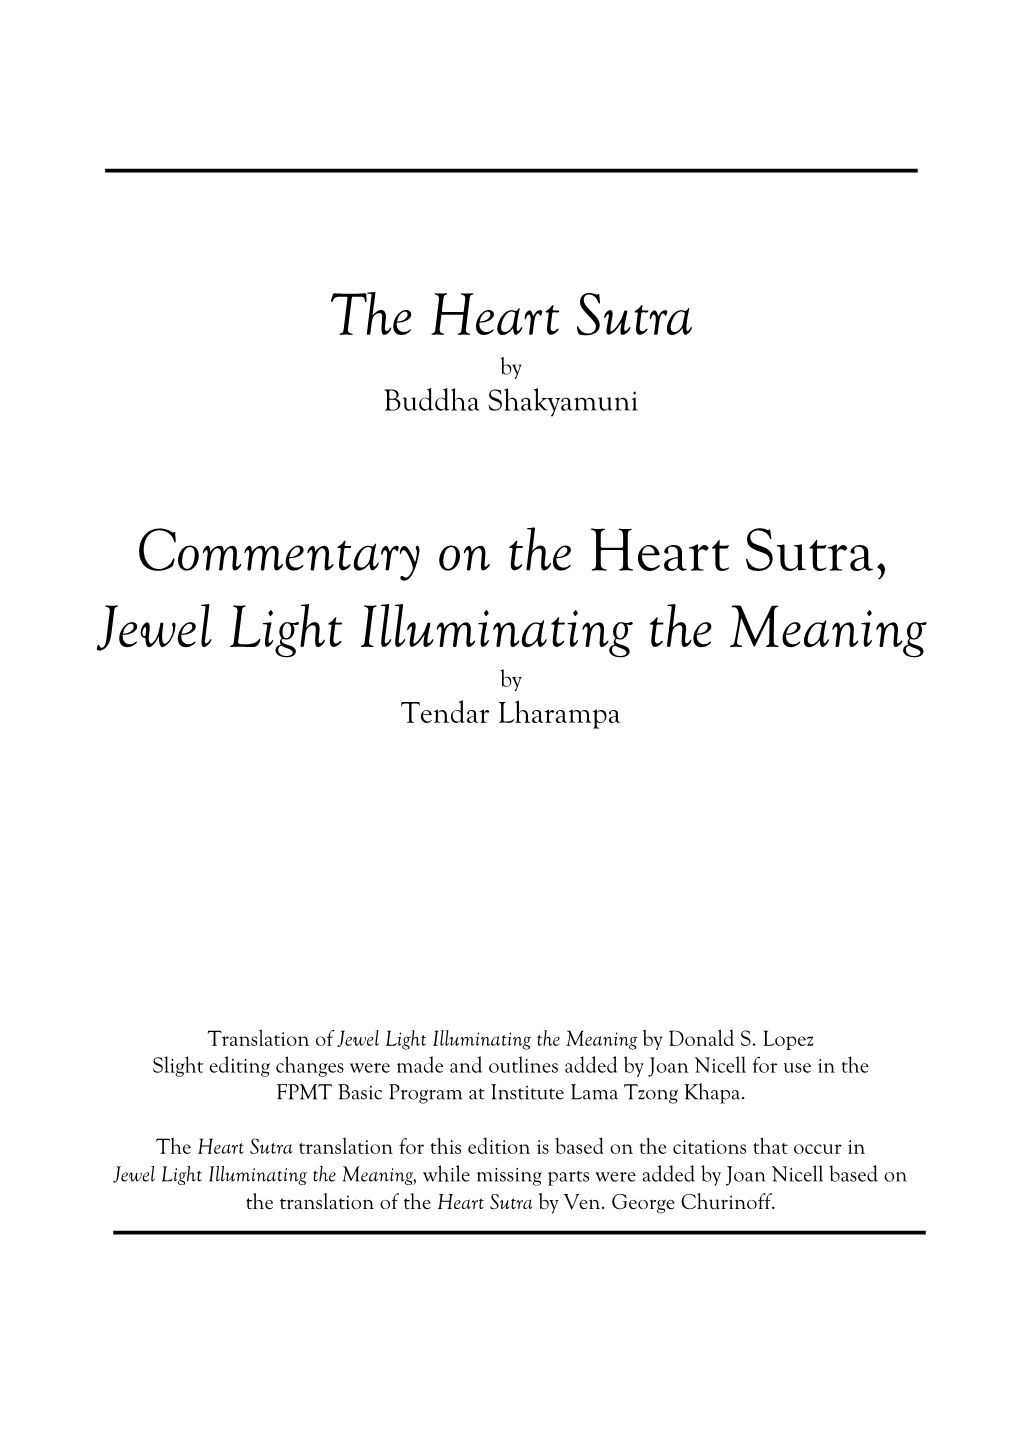 Commentary on the Heart Sutra, Jewel Light Illuminating the Meaning by Tendar Lharampa